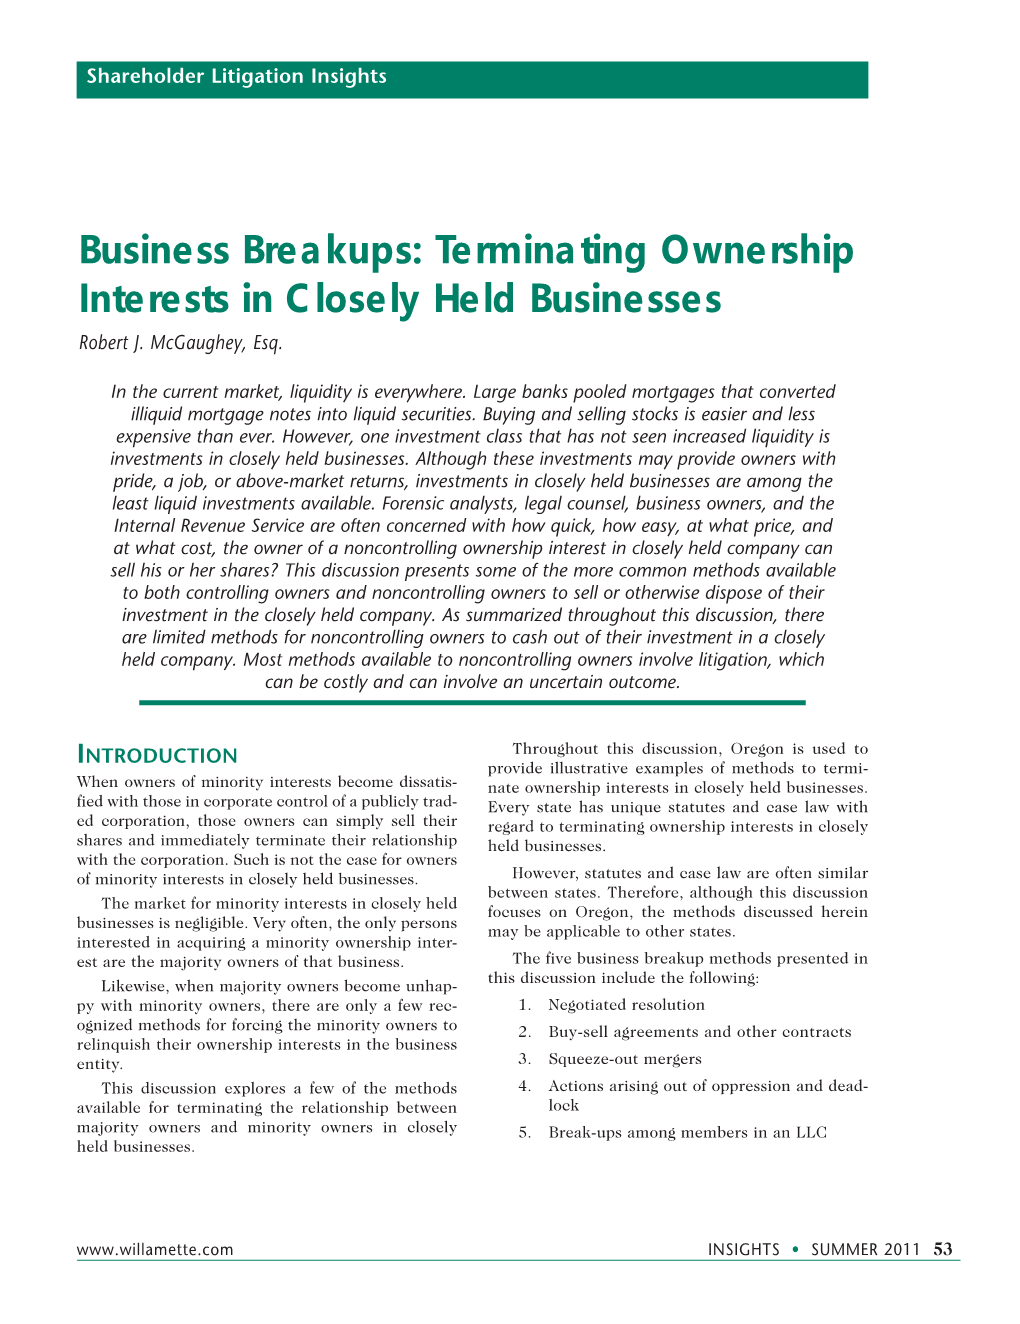 Business Breakups: Terminating Ownership Interests in Closely Held Businesses Robert J